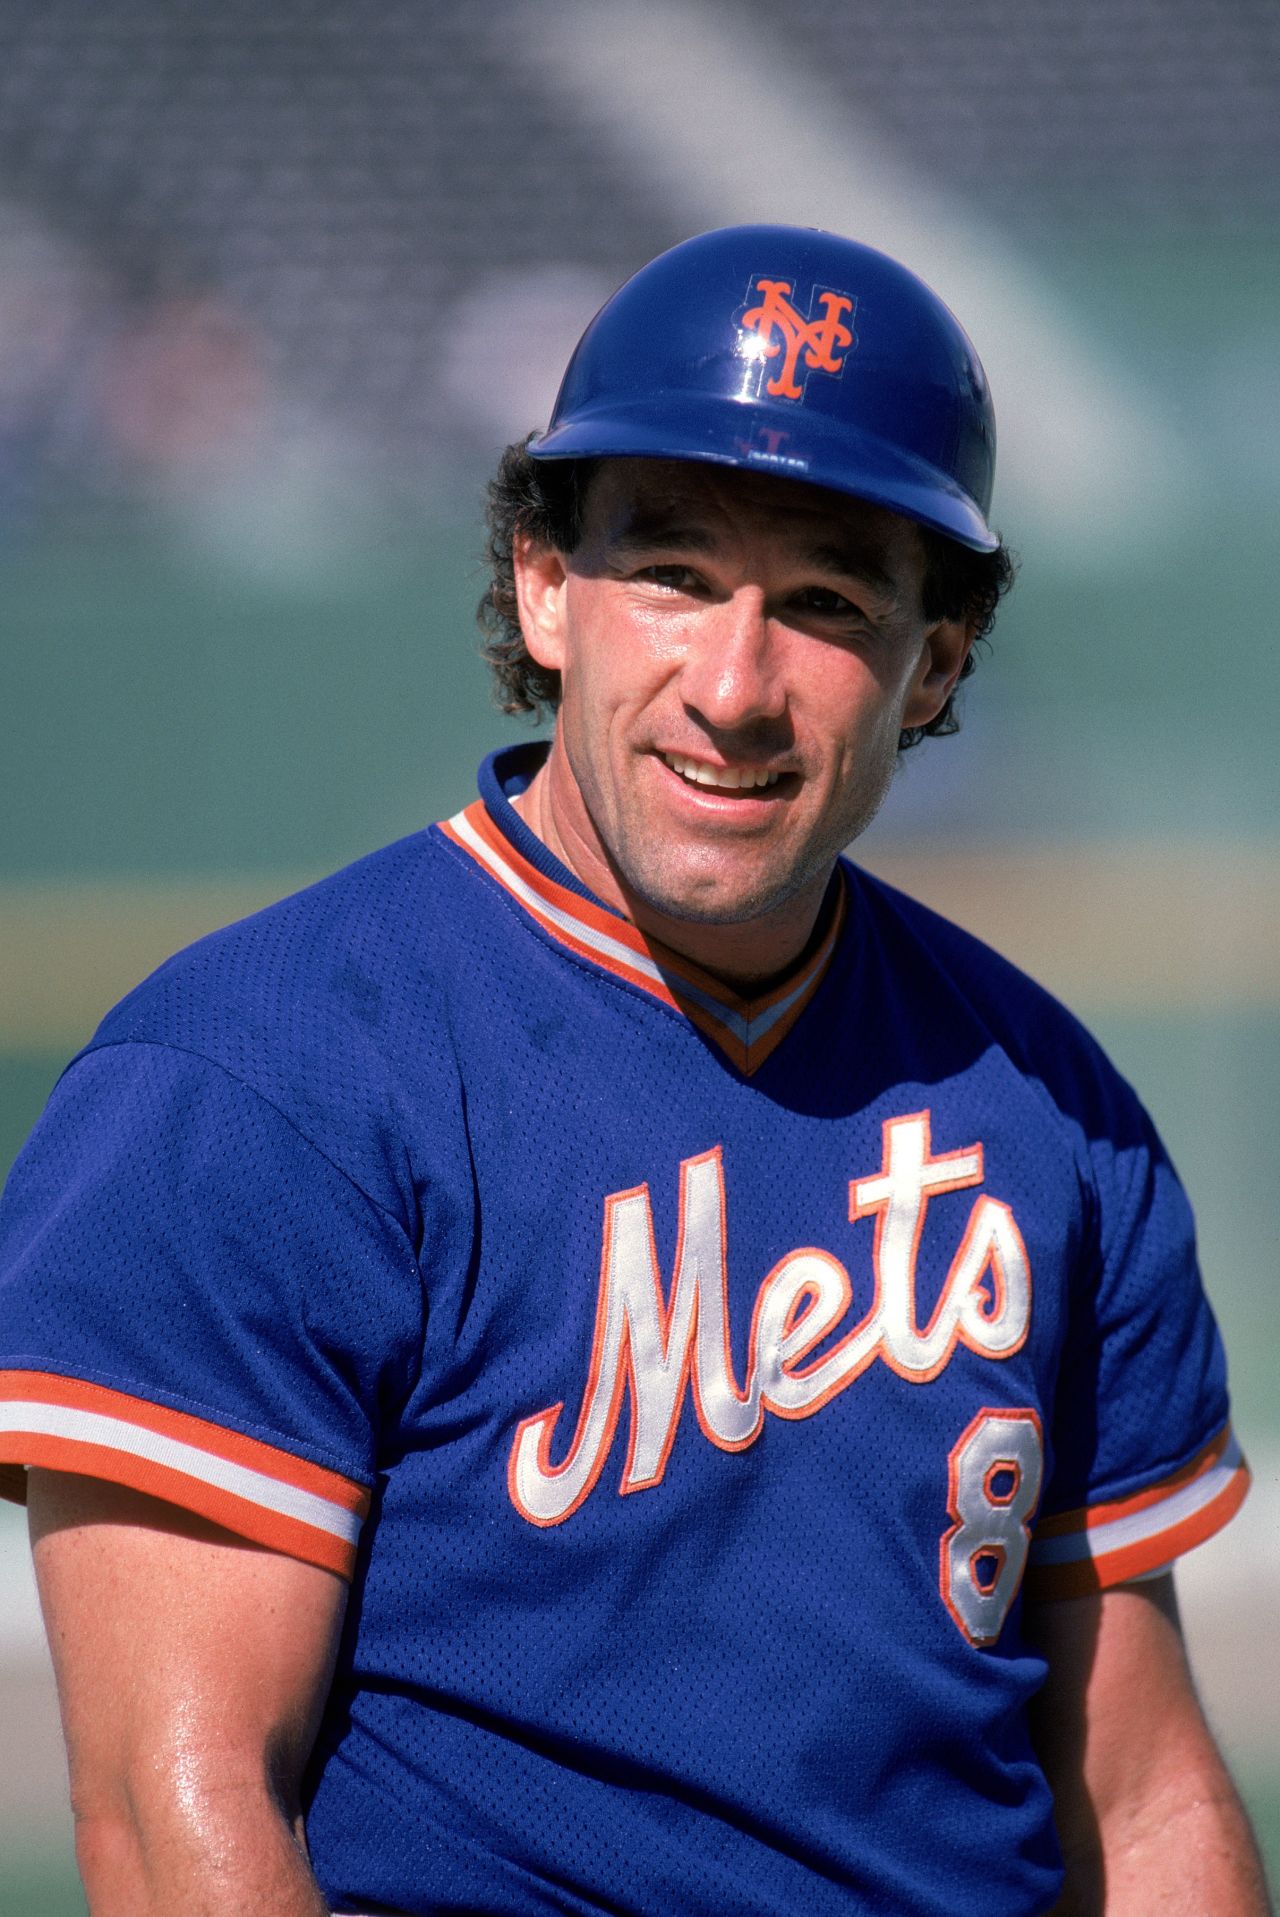 Hall of Fame catcher for the New York Mets <a href="http://news.blogs.cnn.com/2012/02/16/baseball-great-gary-carter-dies-after-cancer-battle/" target="_blank">Gary Carter</a> lost a battle to brain cancer at age 57 on February 16.